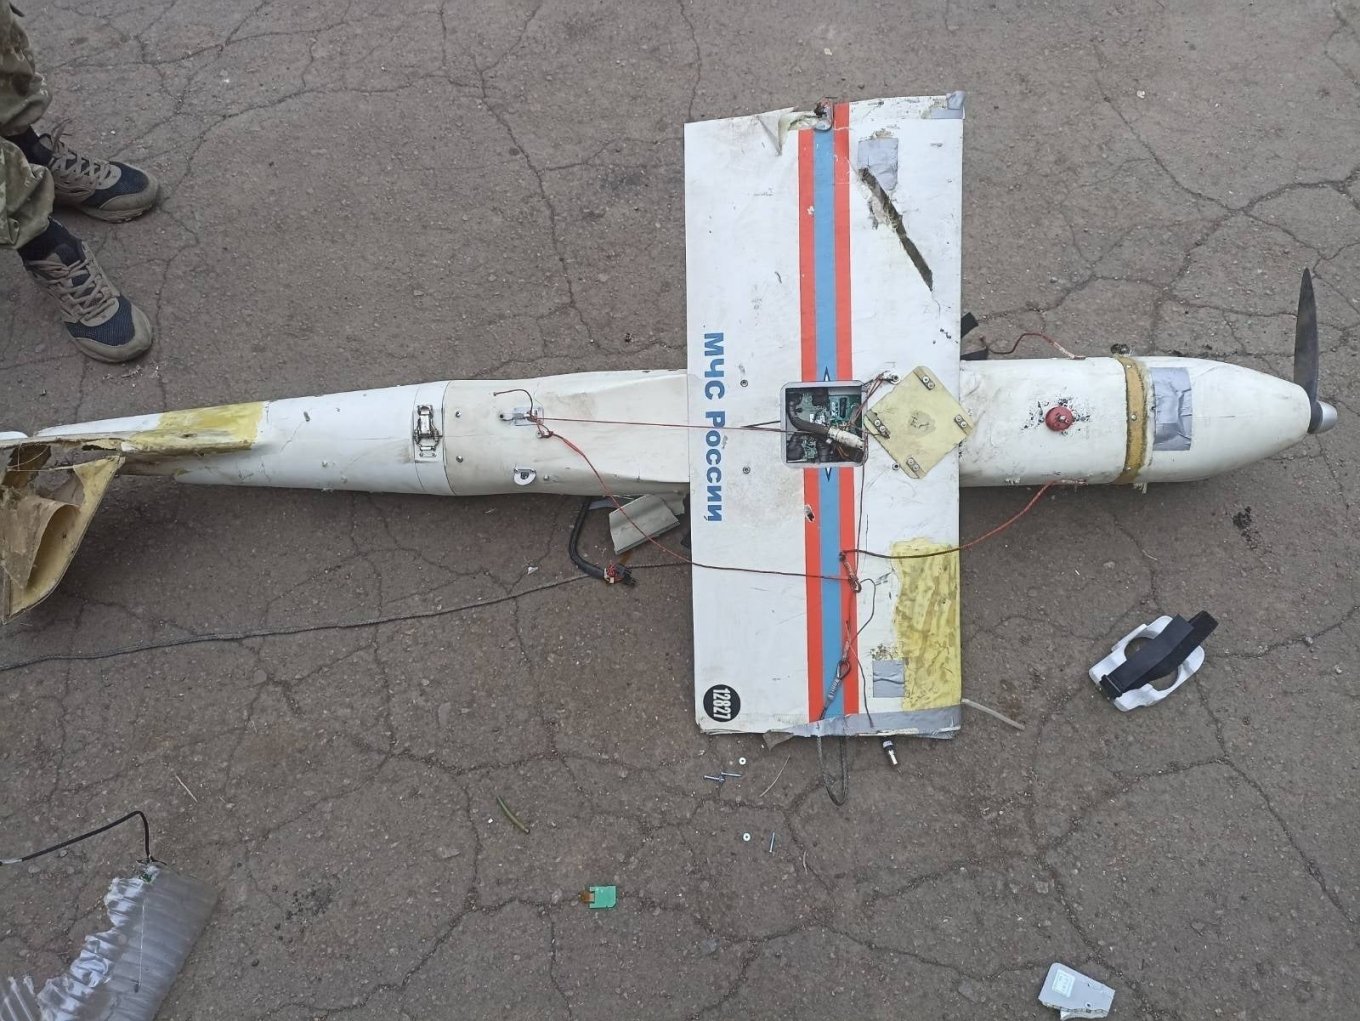 Russian dron Orlan-10, that was destroyed by Ukrainian troops